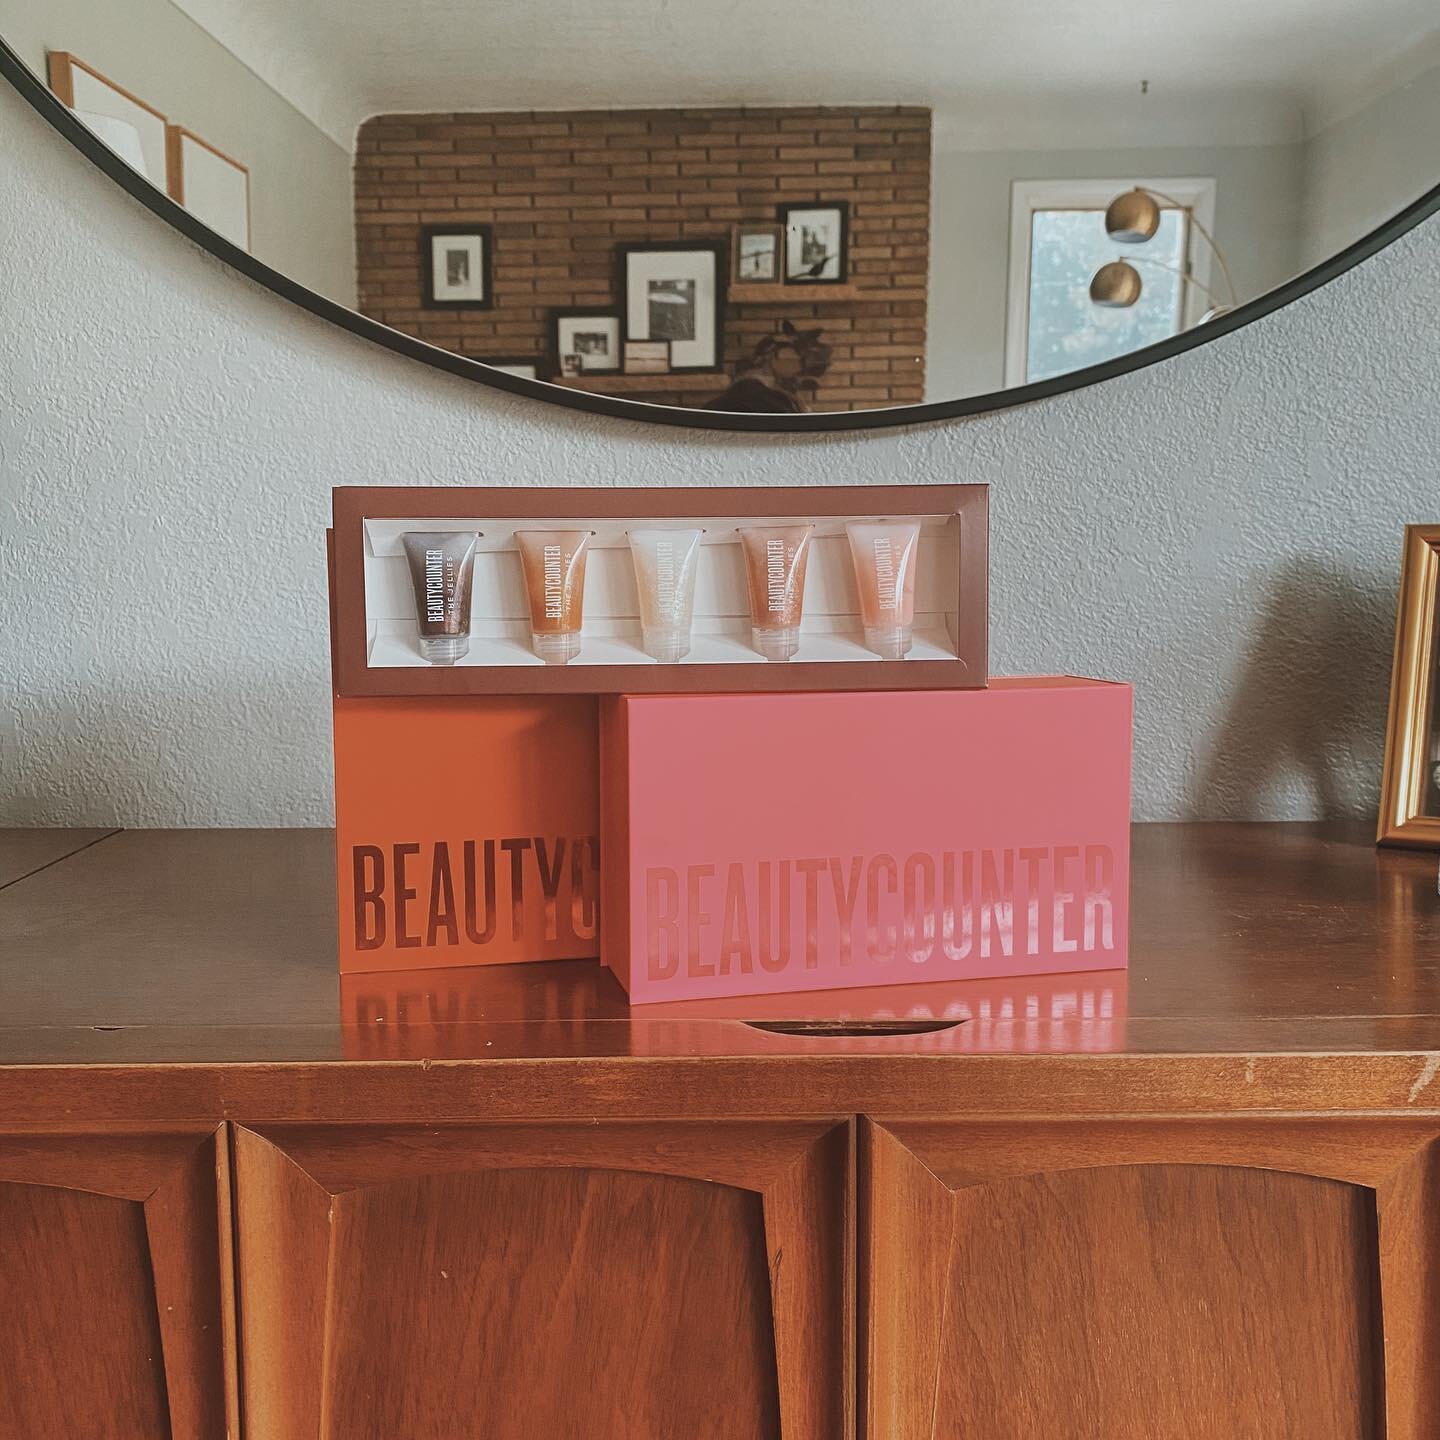 Beautycounter giveaway!

Ya'll know I'm mostly in to this for my discount these days, but the Jelly's came back and I bought 2 packs of them and I was going to keep them both, but am now thinking it would be more fun to give them away. So I'm going t